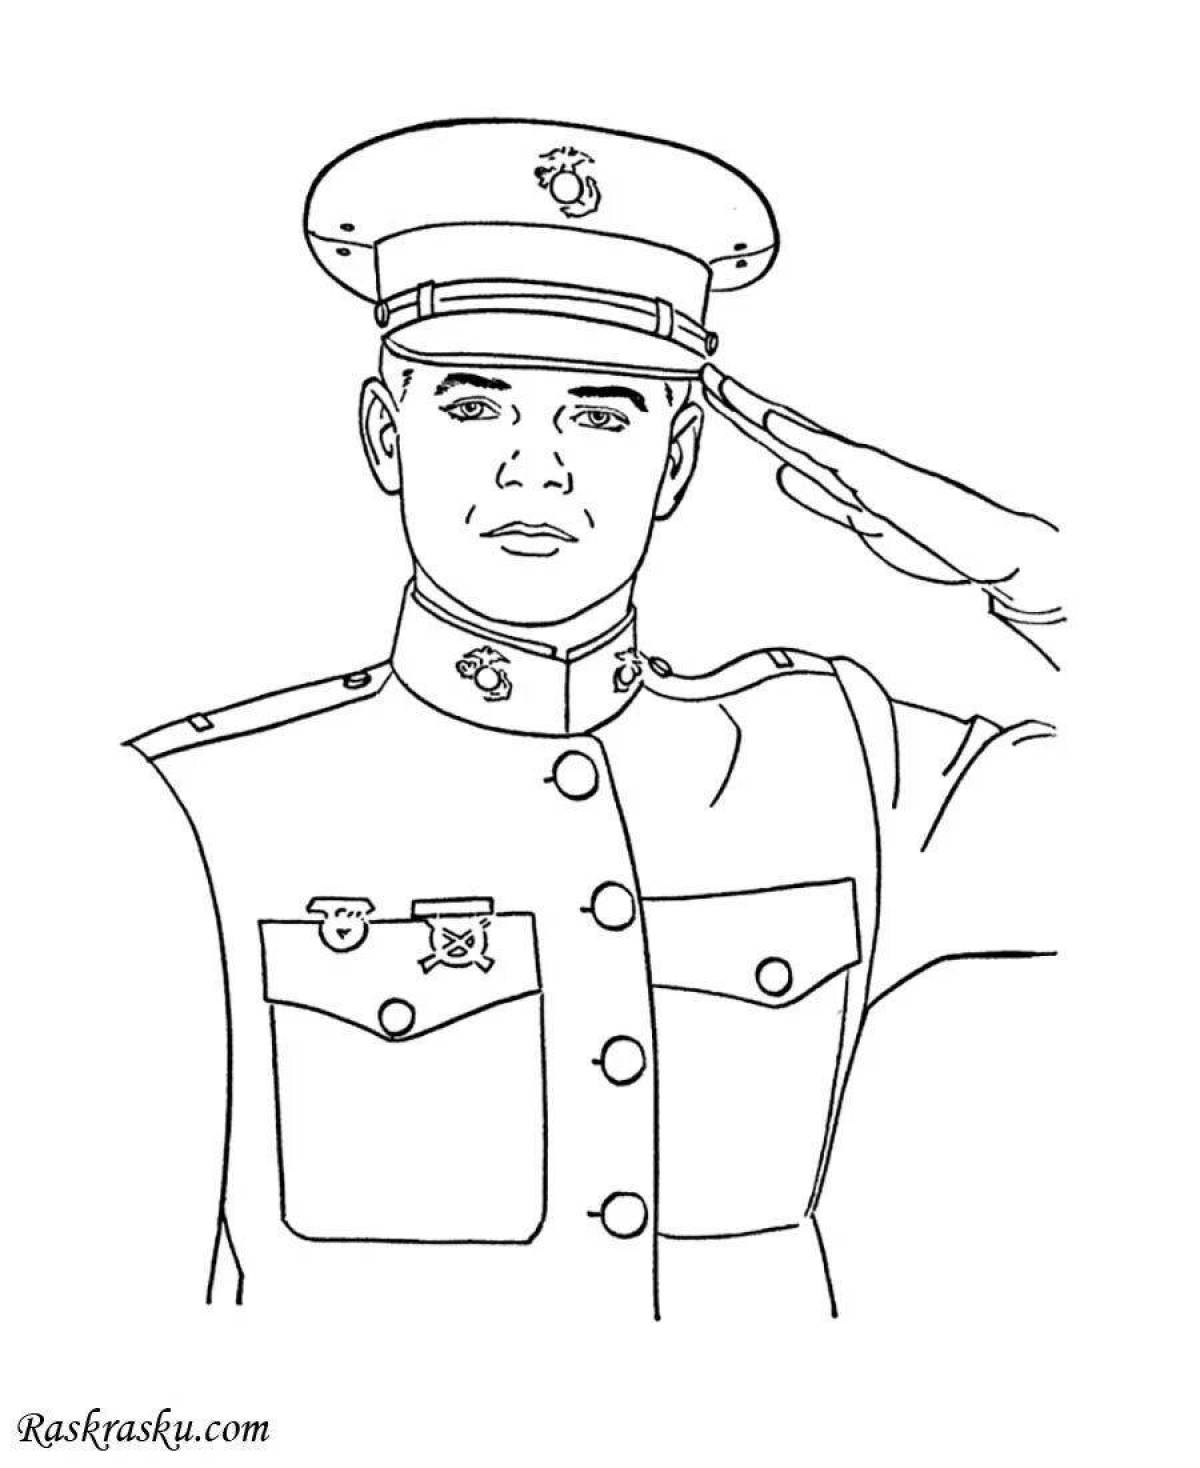 Cute soldier coloring page 23 February